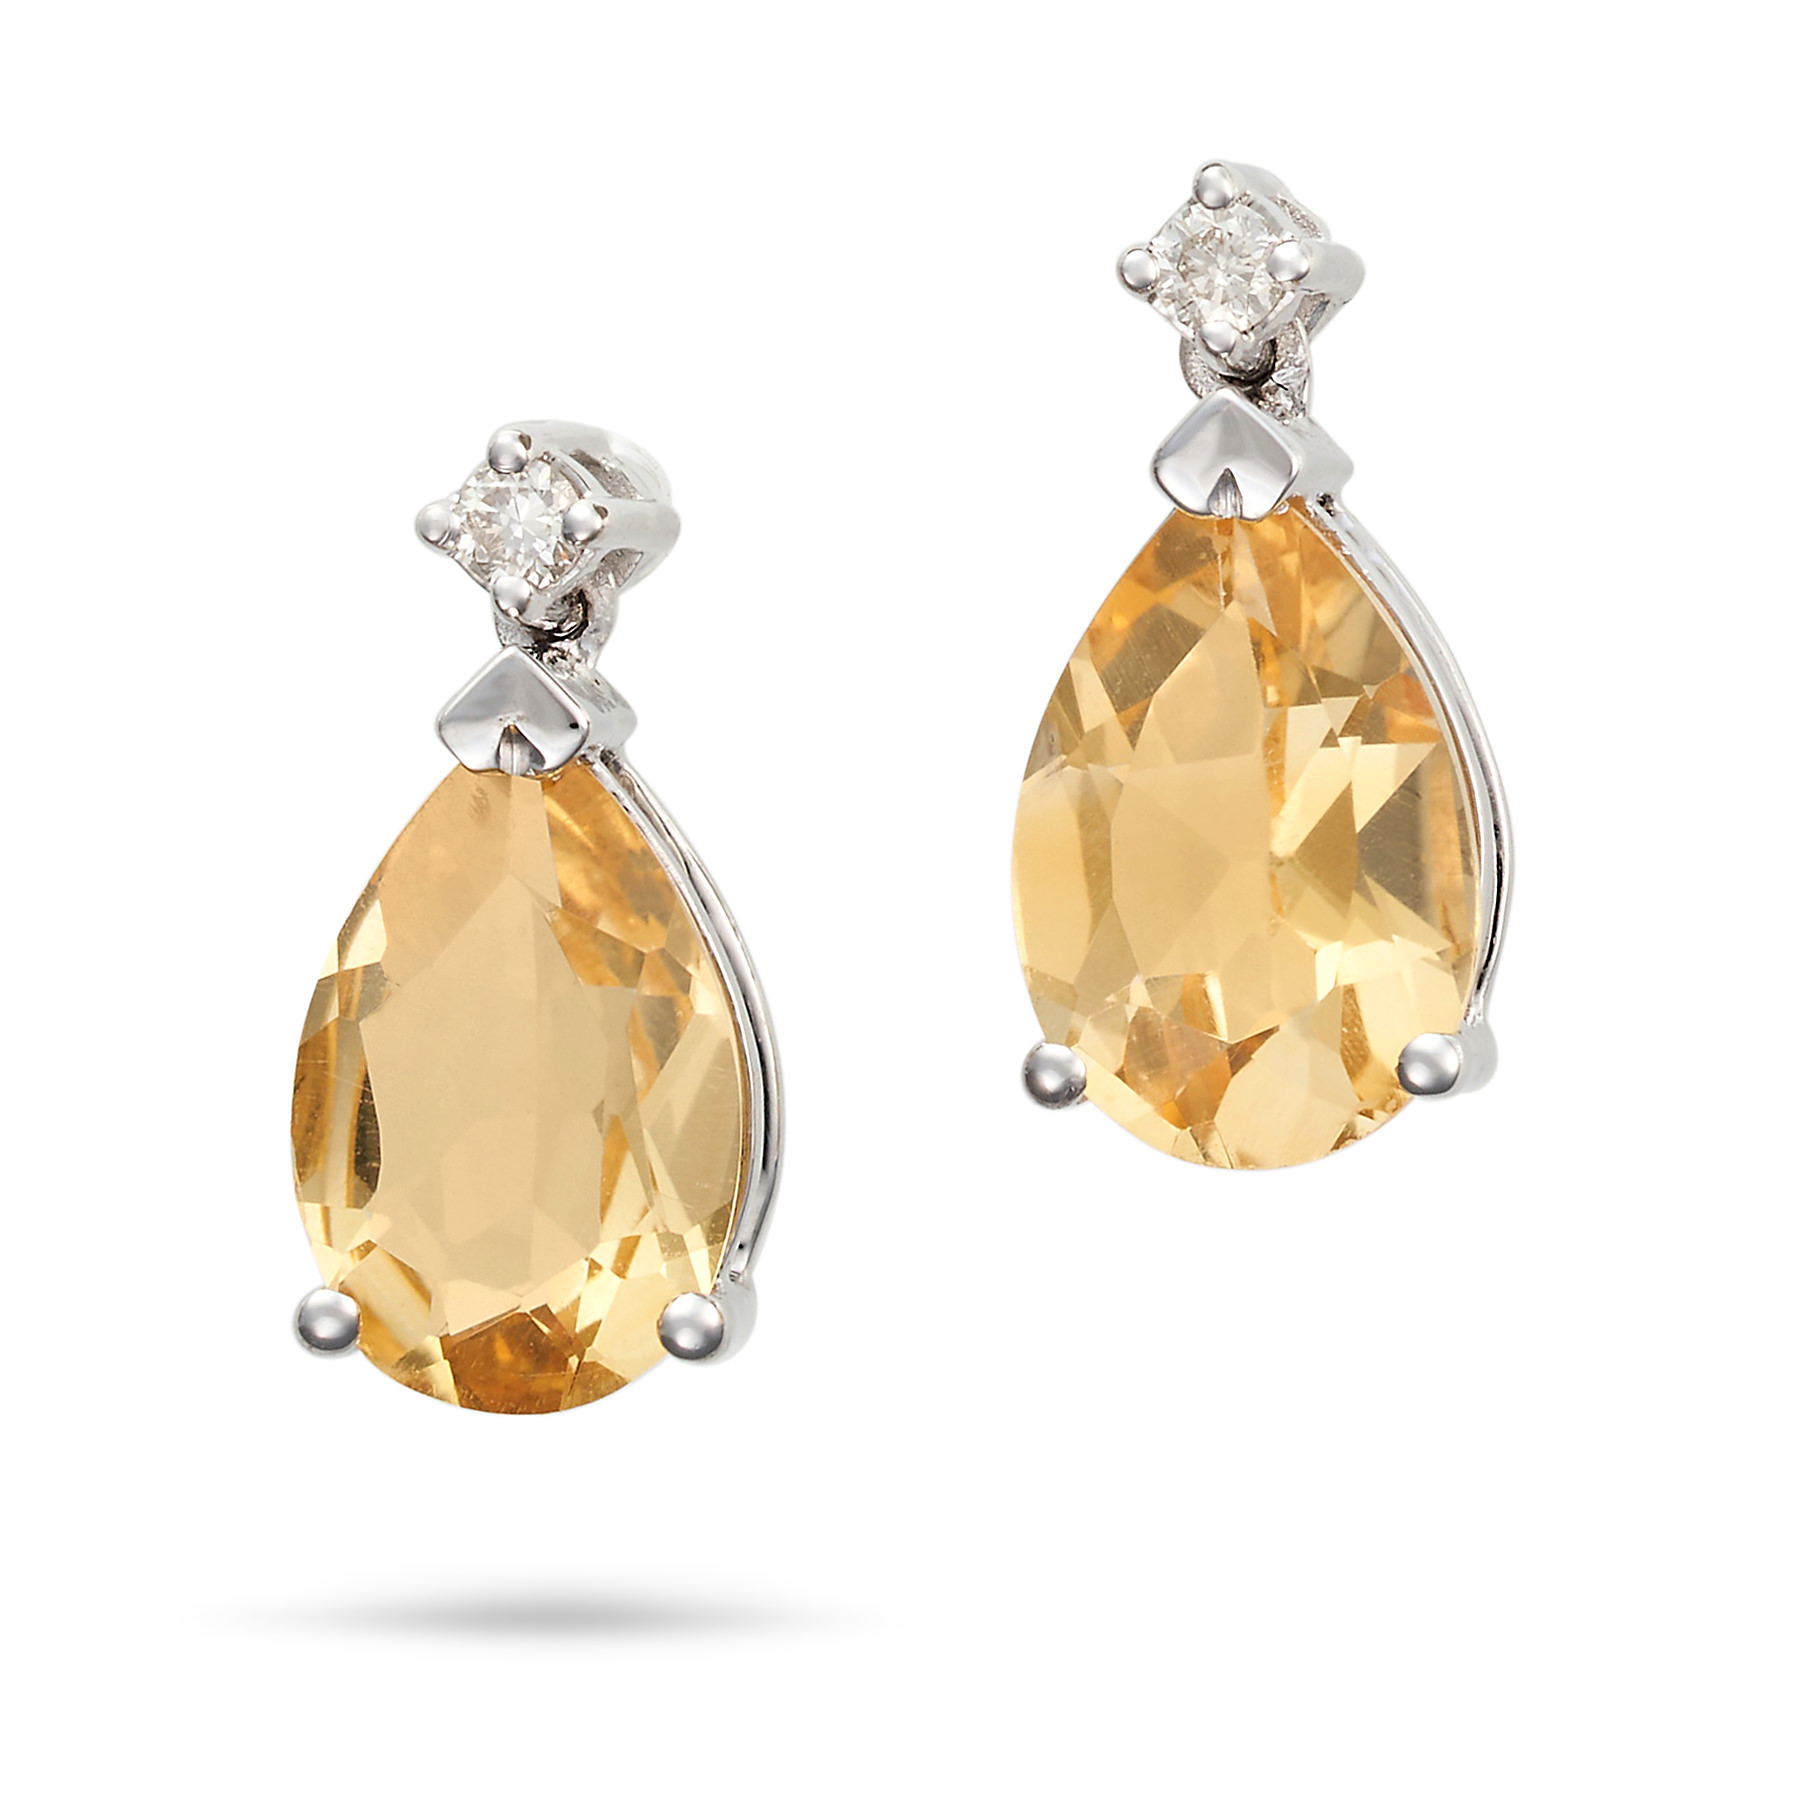 A PAIR OF DIAMOND AND CITRINE EARRINGS each set with a round brilliant cut diamond, suspending a ...